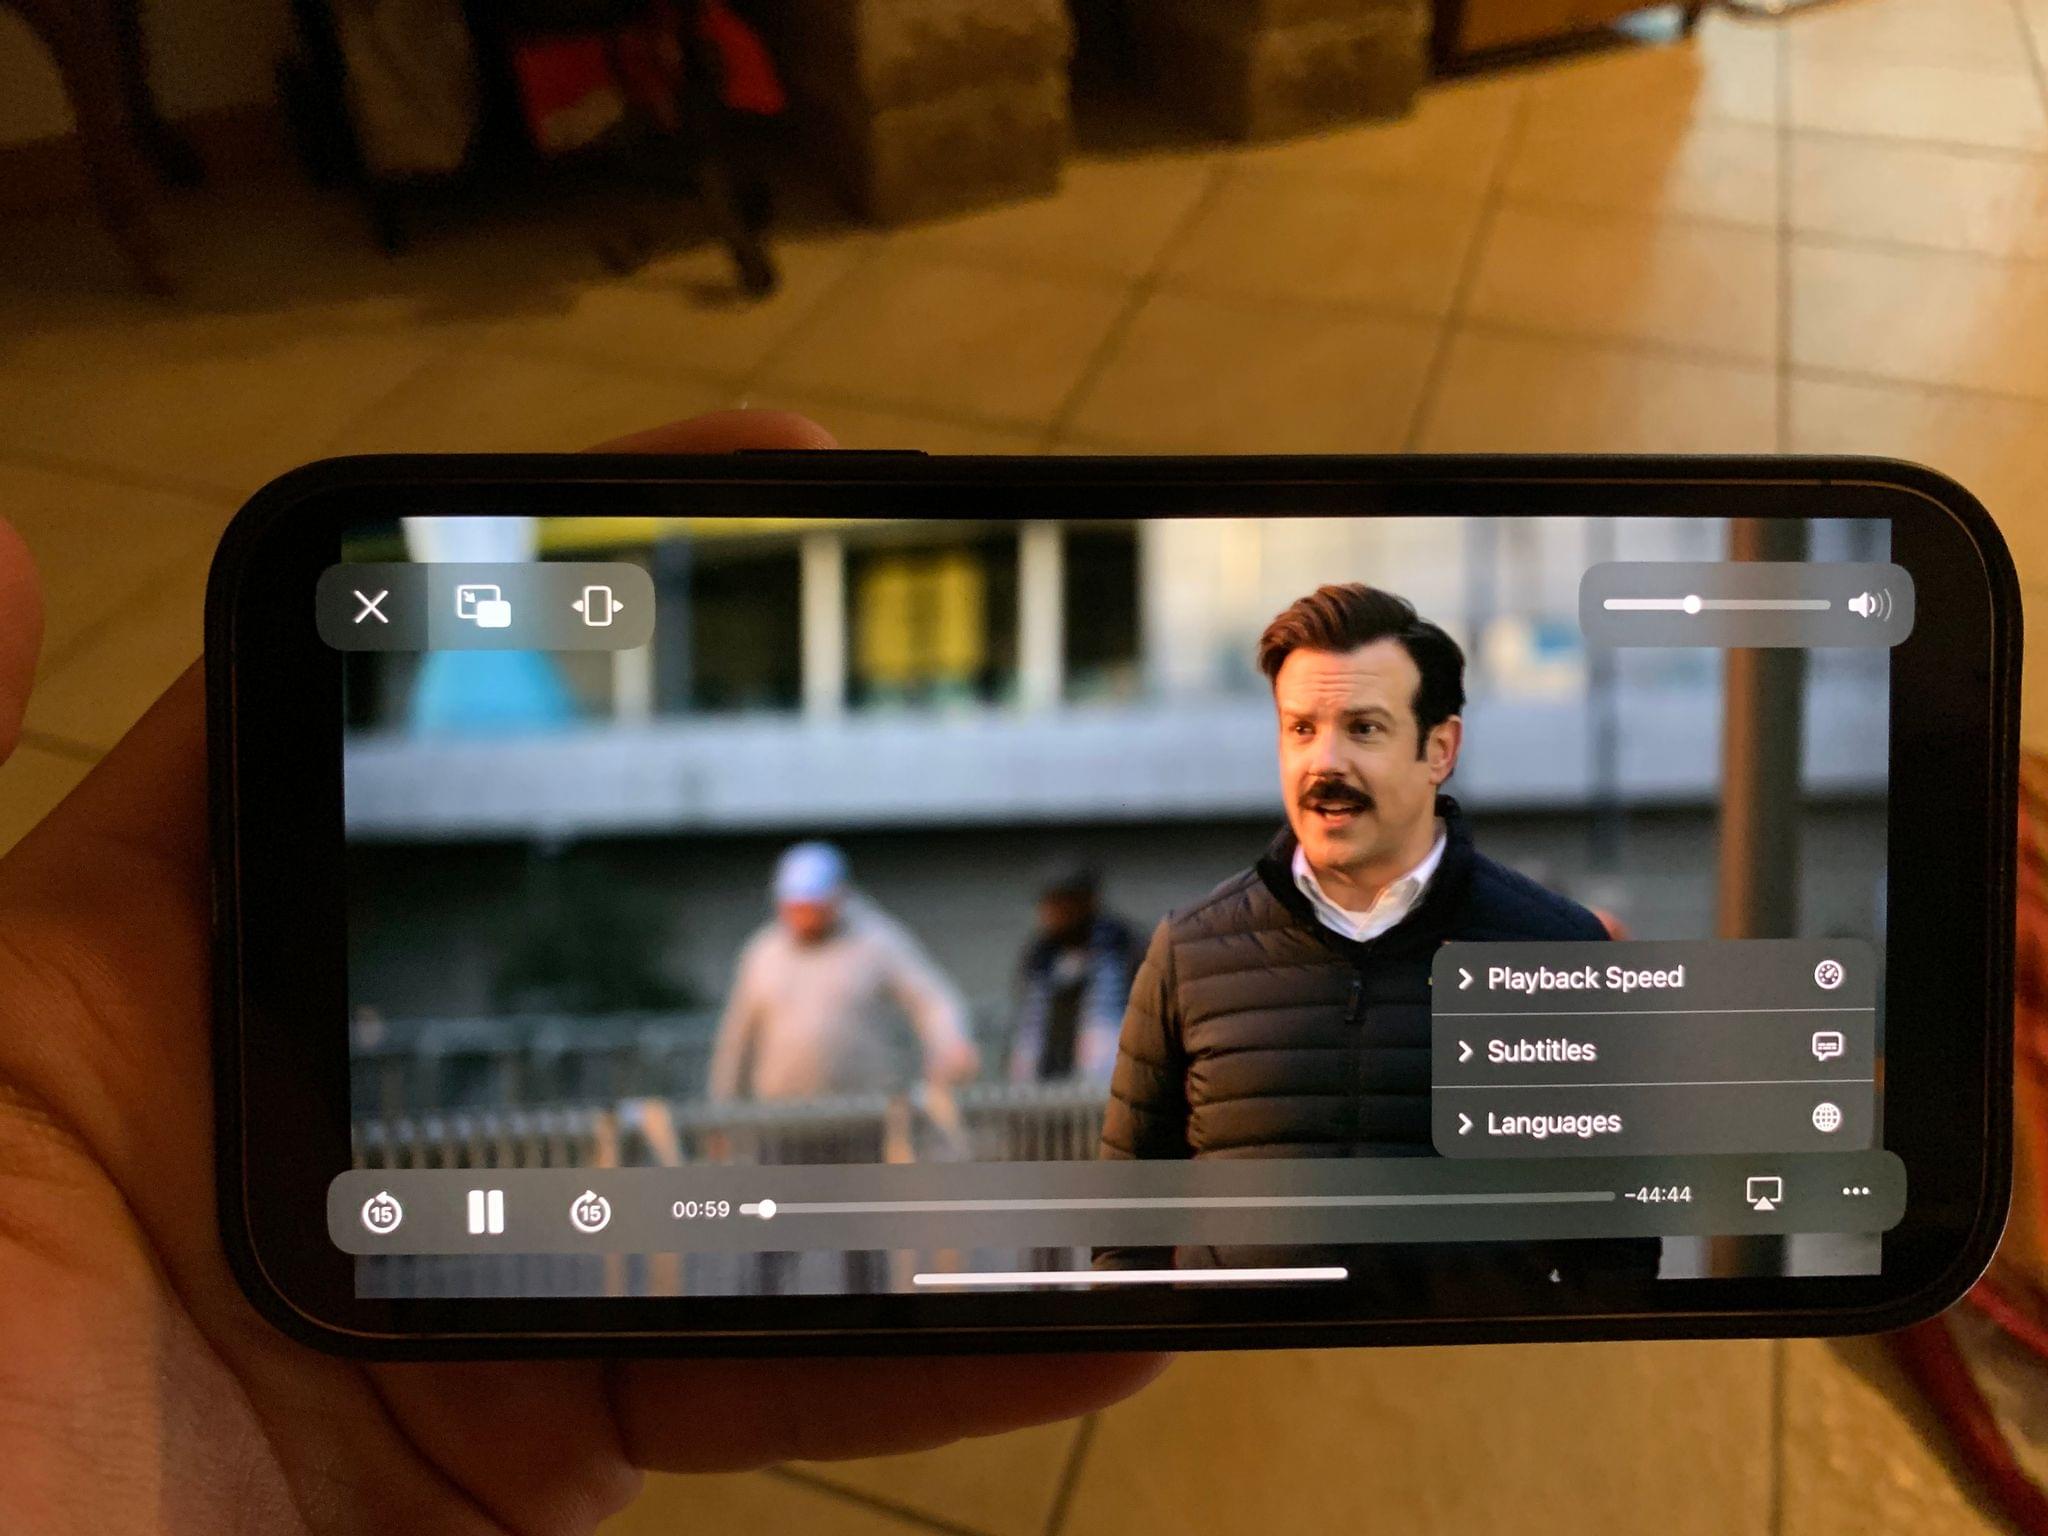 DRM won't let me take a screenshot of the video player and Ted Lasso? There, I took a picture instead. Am I right, Coach?